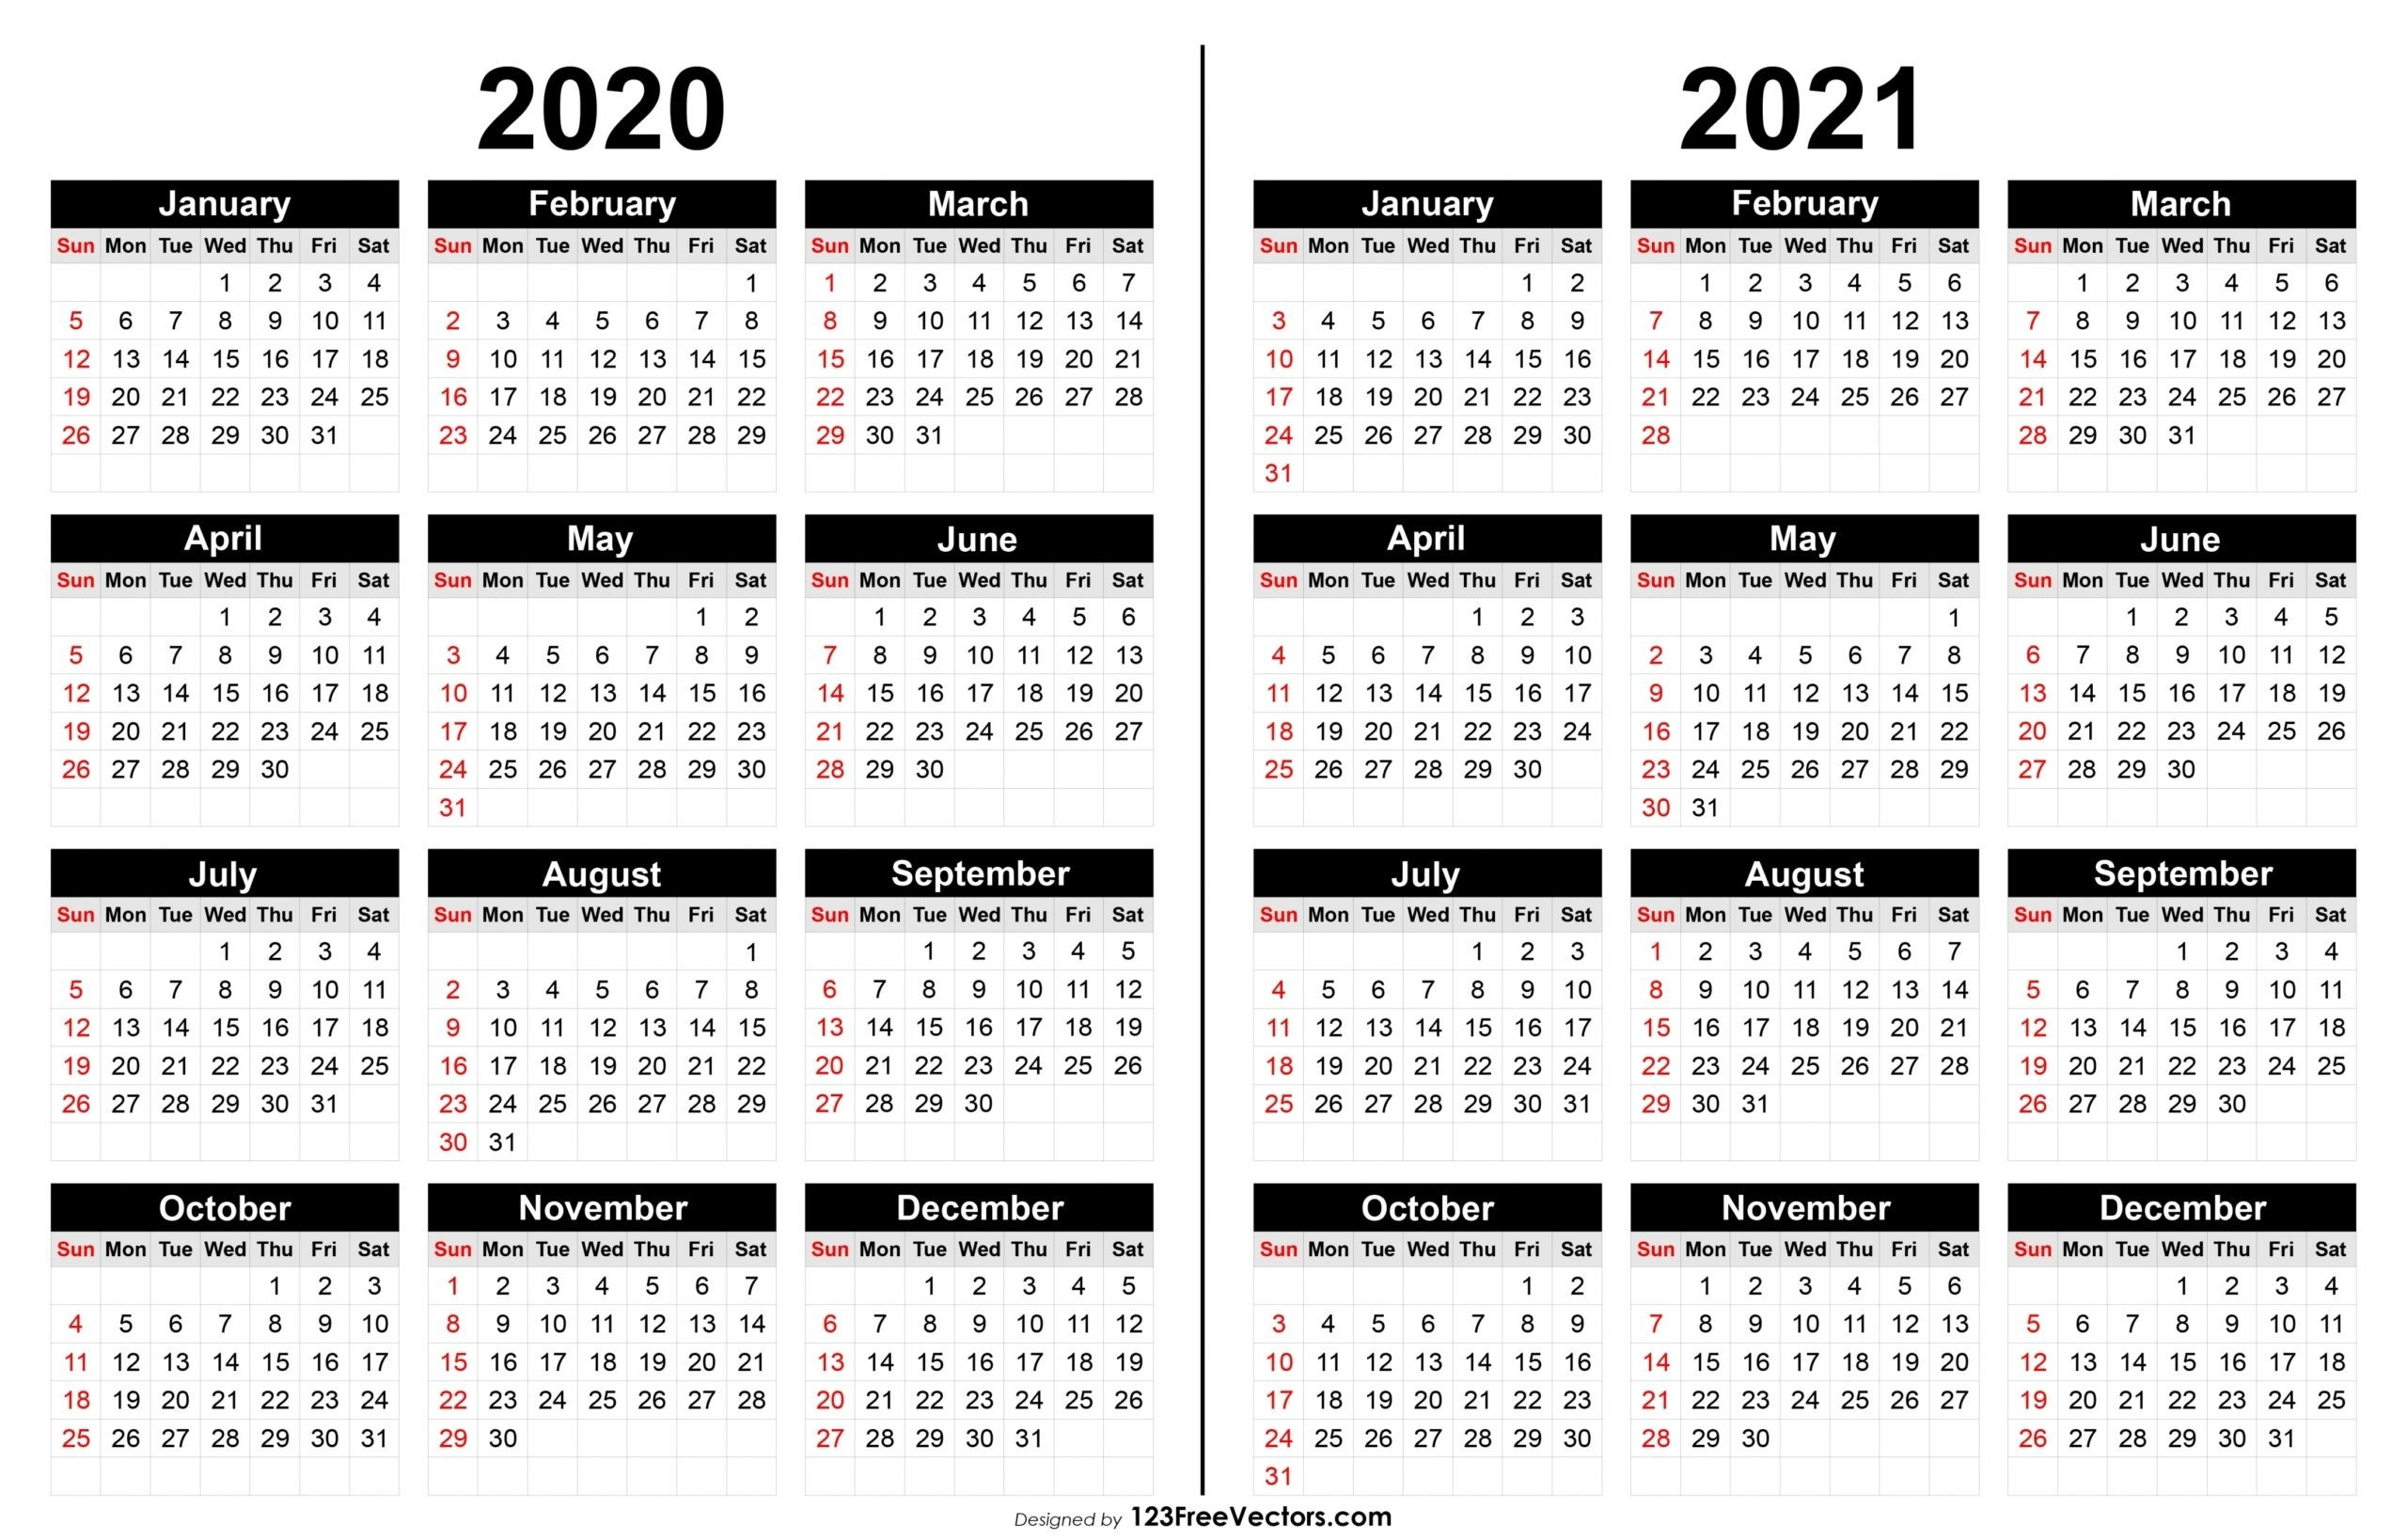 2021 Print Free Calendars Without Downloading | Calendar-Print Free Calendars Without Downloading 2021